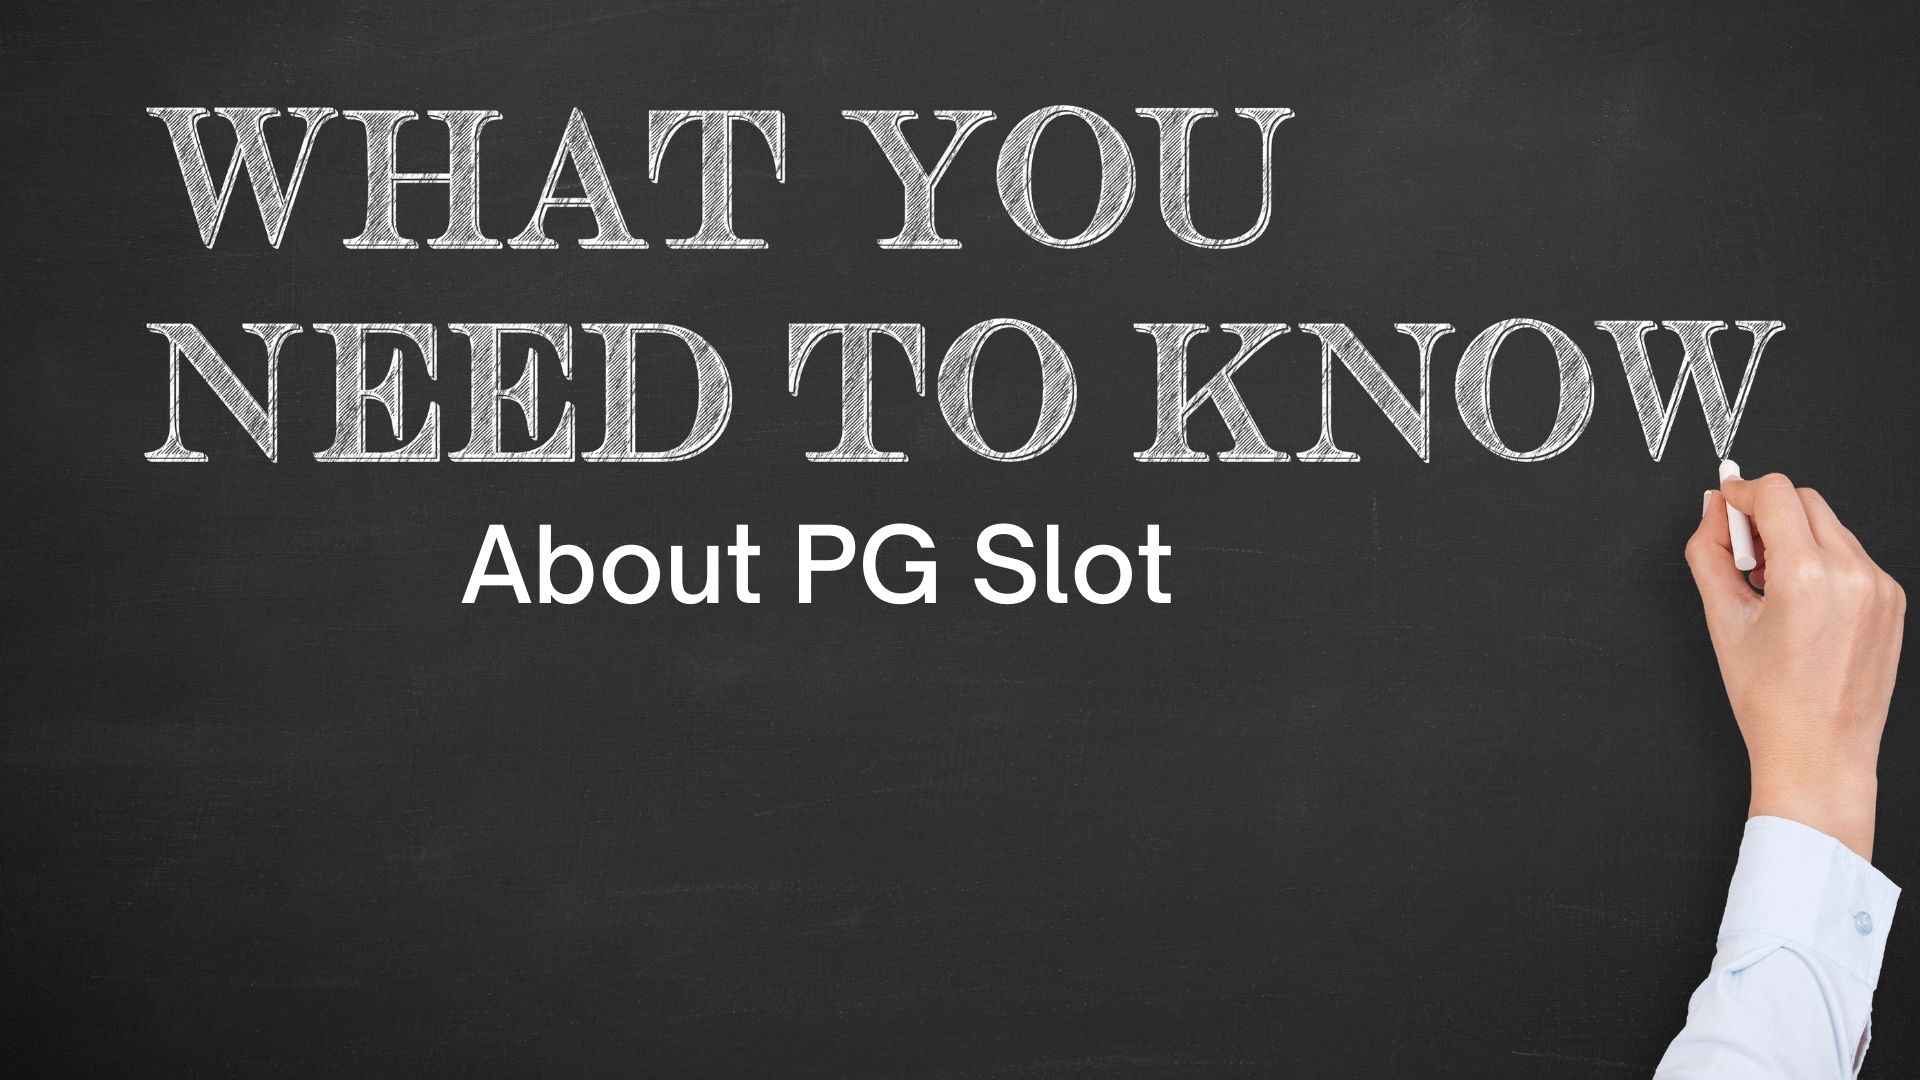 What You Need to Know About PG Slot